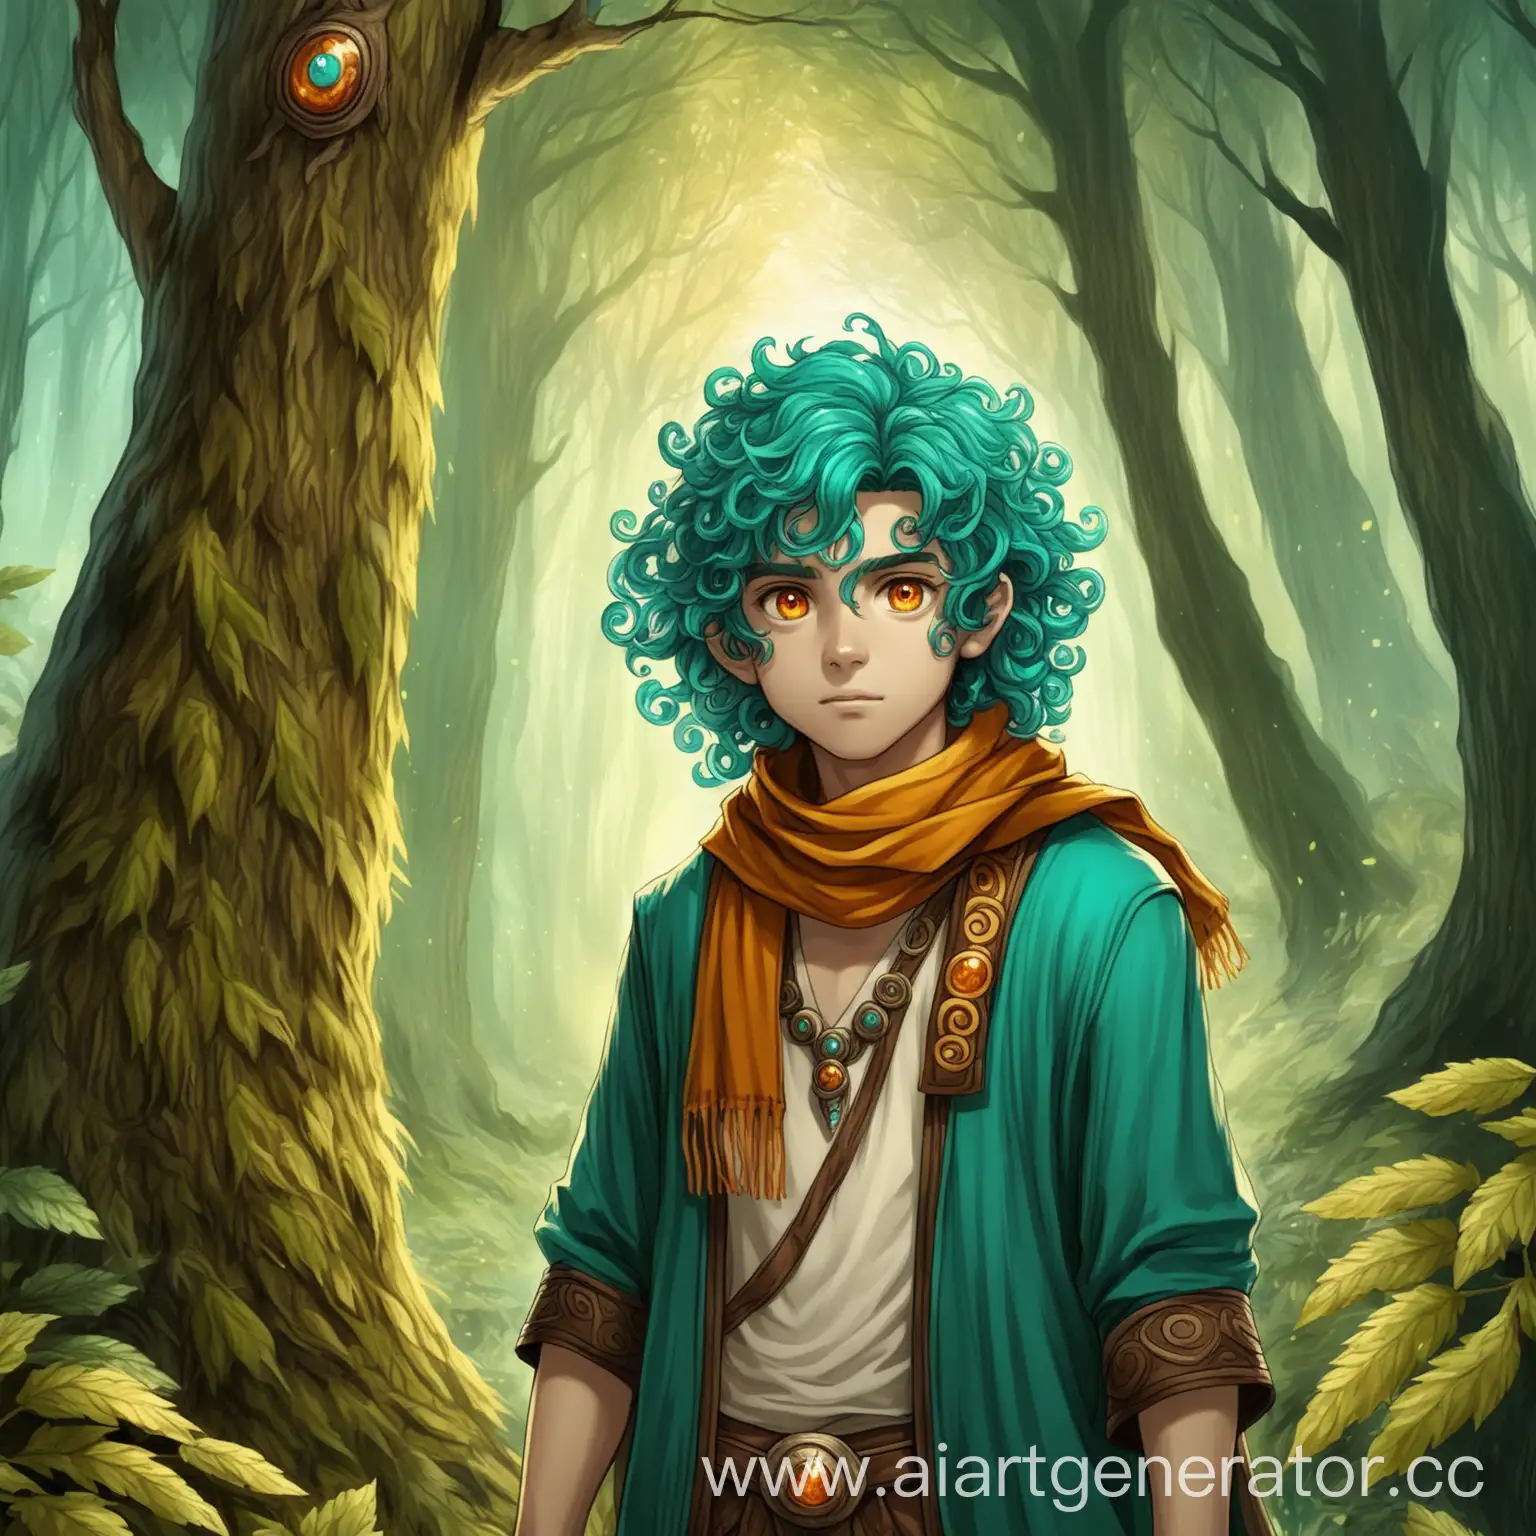 Young-Druid-Boy-with-Turquoise-Hair-in-Enchanted-Forest